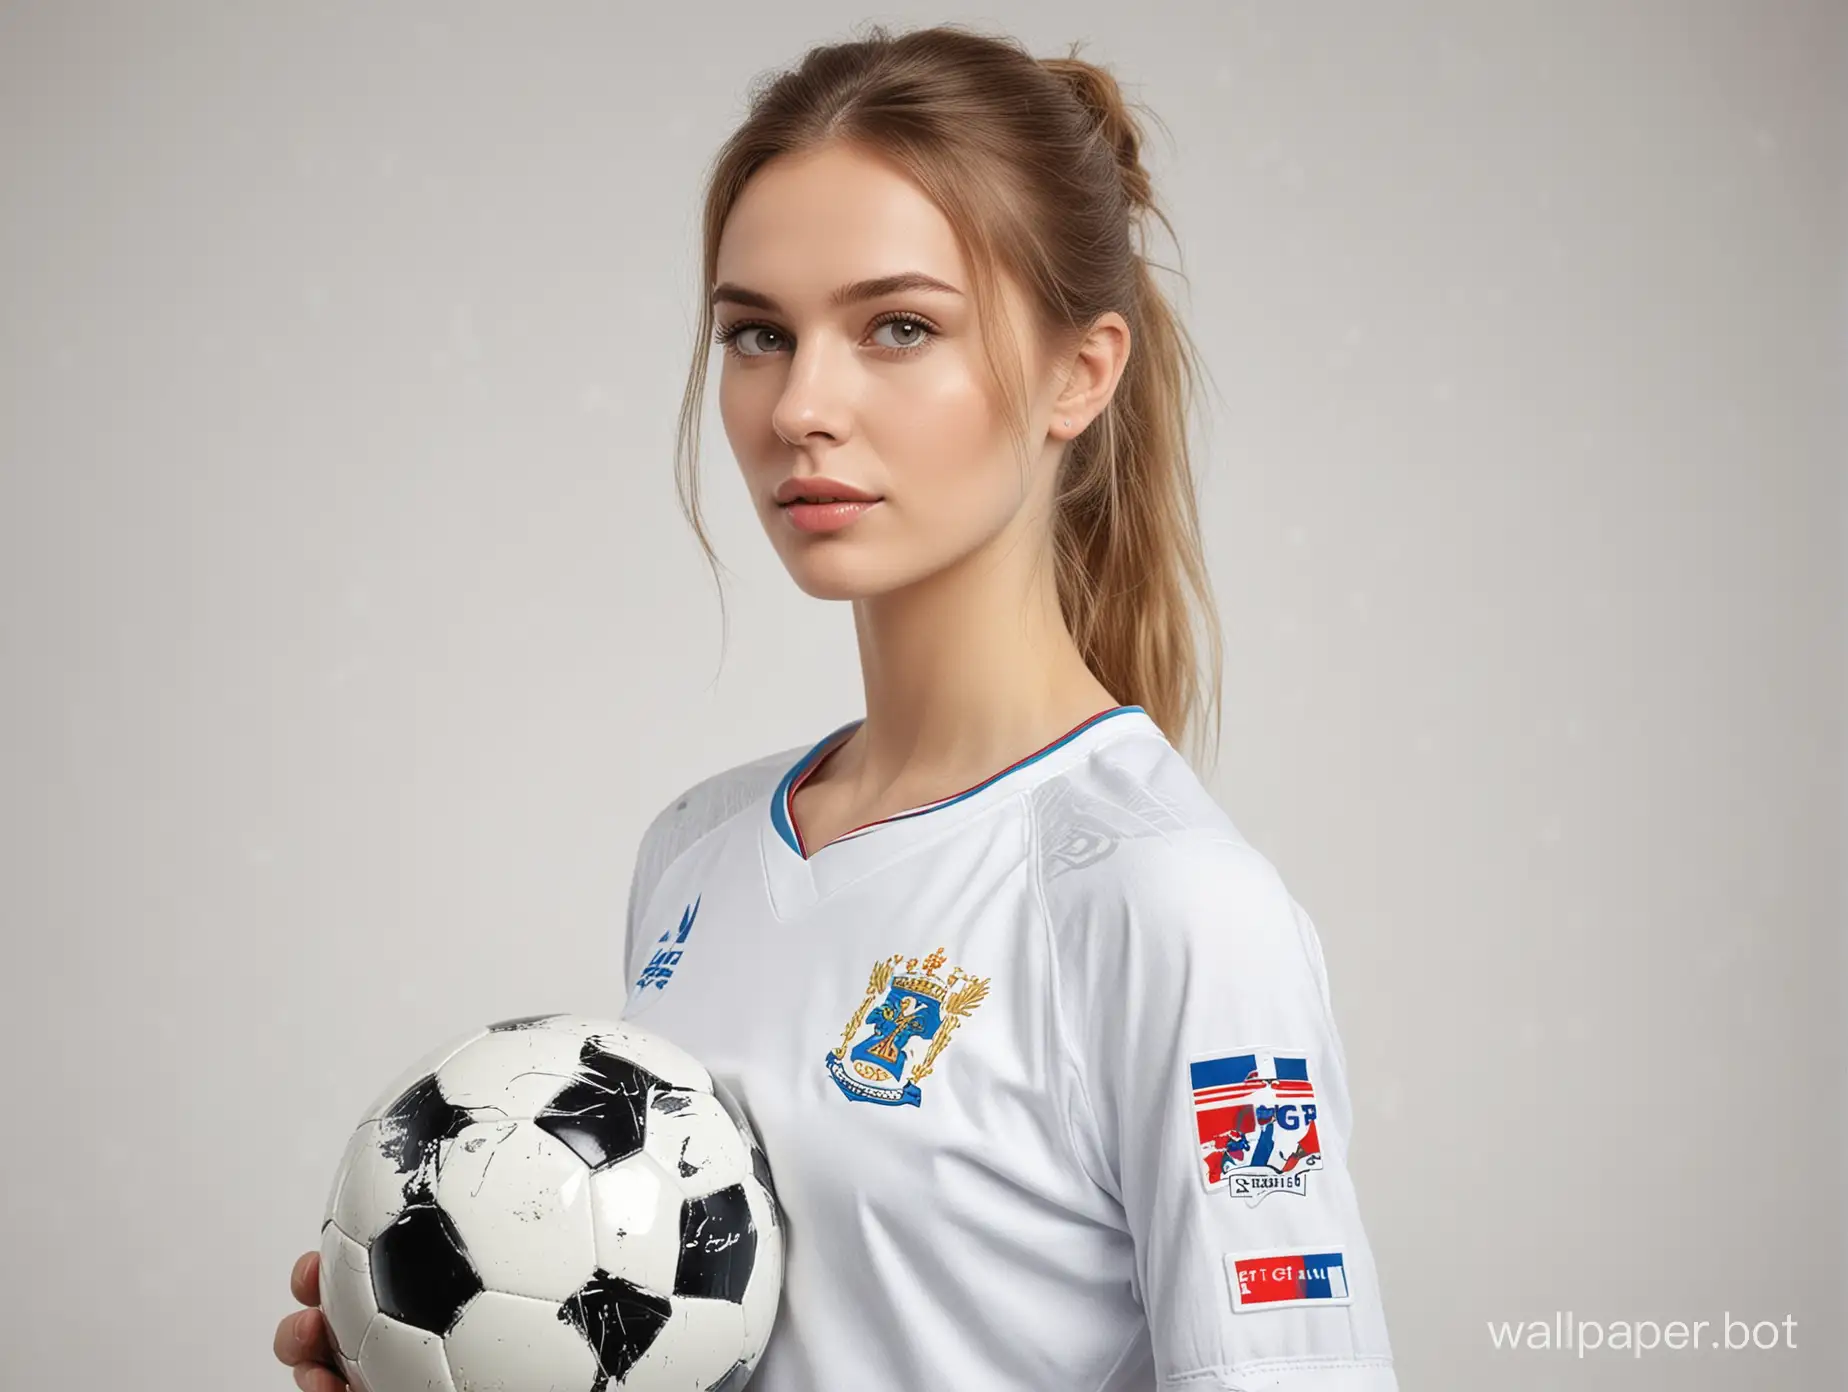 Elegant-25YearOld-Russian-Woman-in-Zenit-Soccer-Jersey-Captivating-Portrait-on-White-Background